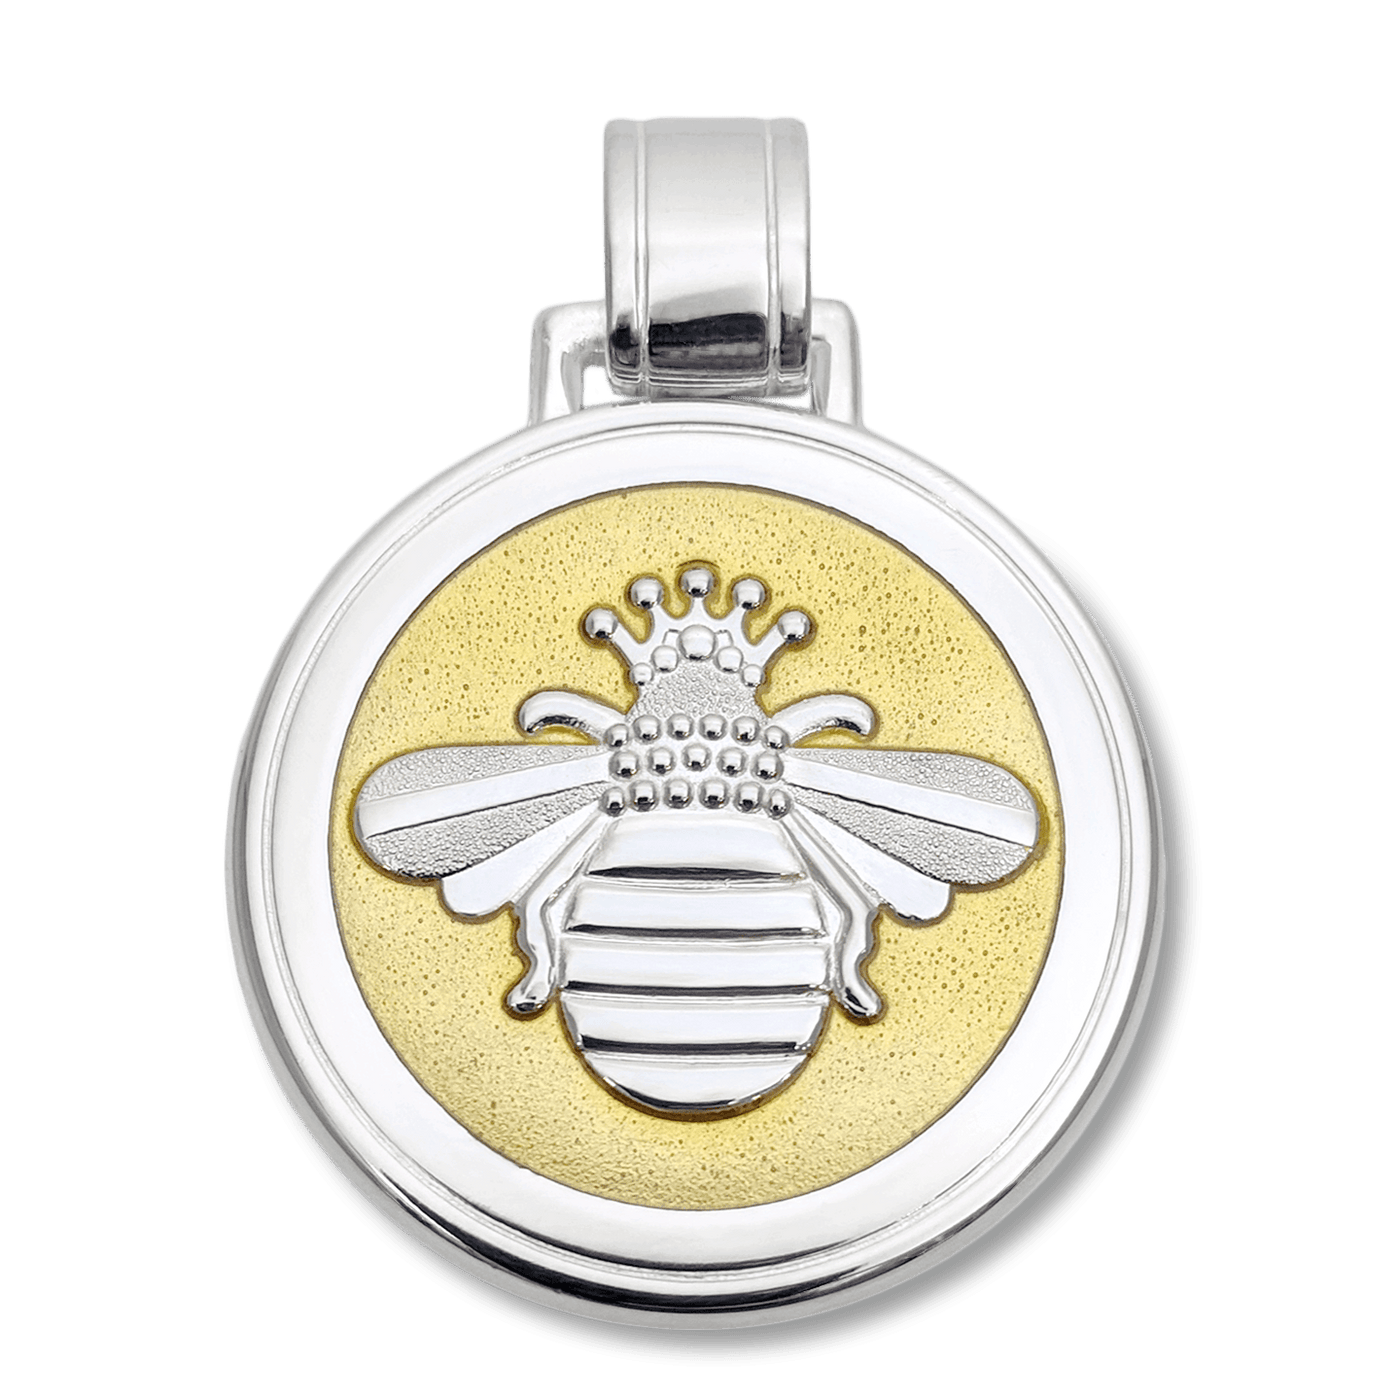 Lola & Company Jewelry Queen Bee Pendant Silver in Gold Center Vermeil